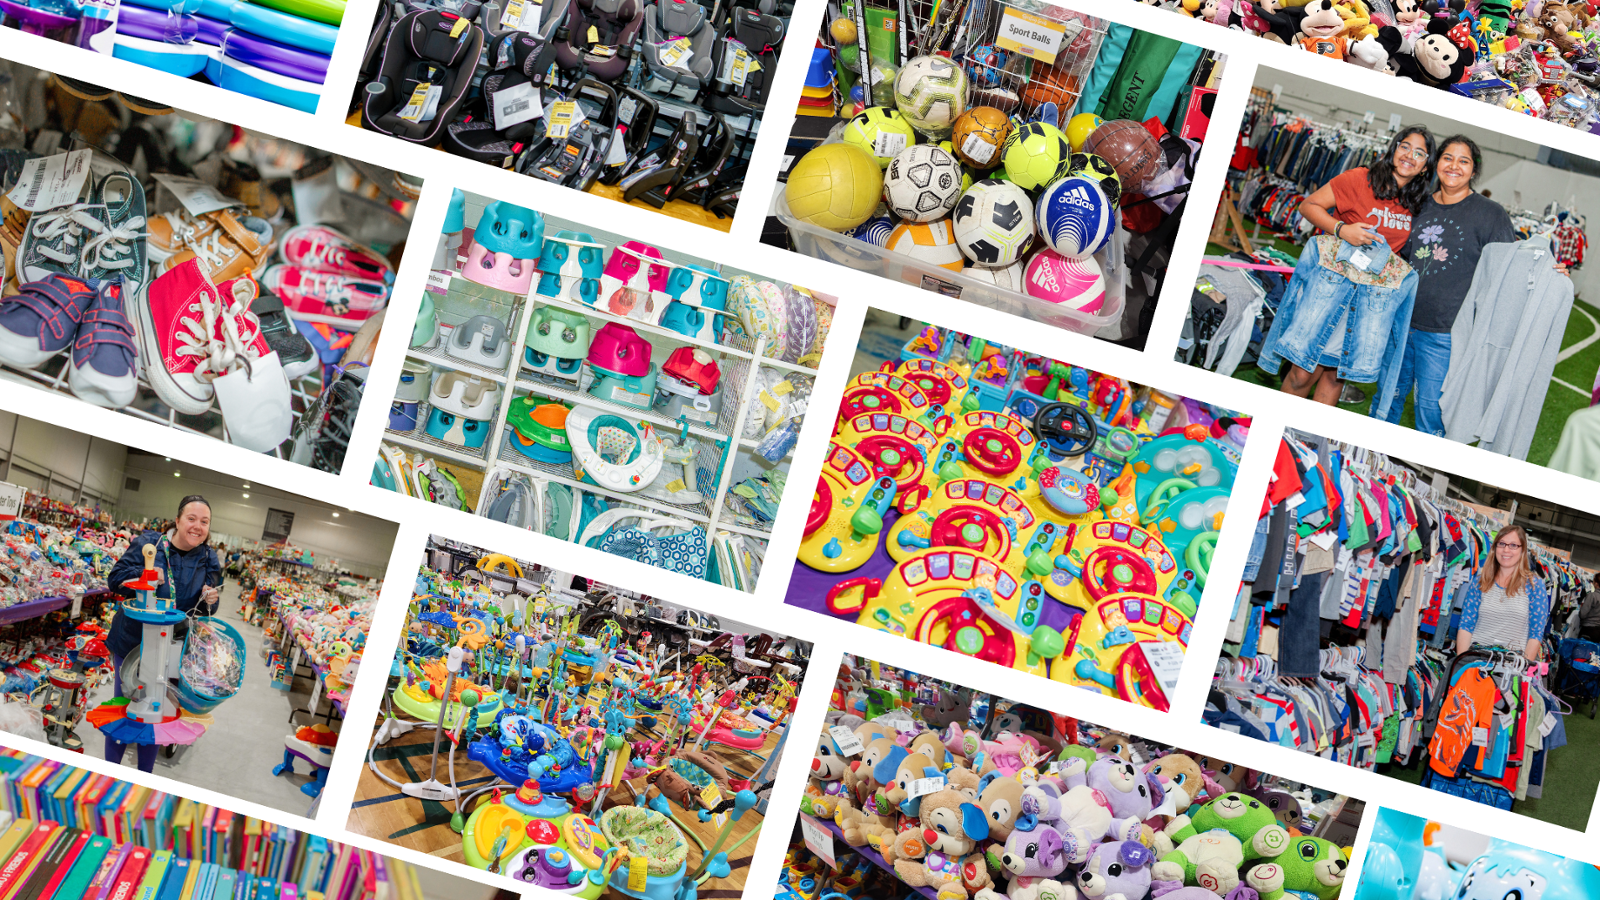 Collage of pictures of children's items. Balls, toys, books, shoes, clothing, car seats, baby items and people shopping.